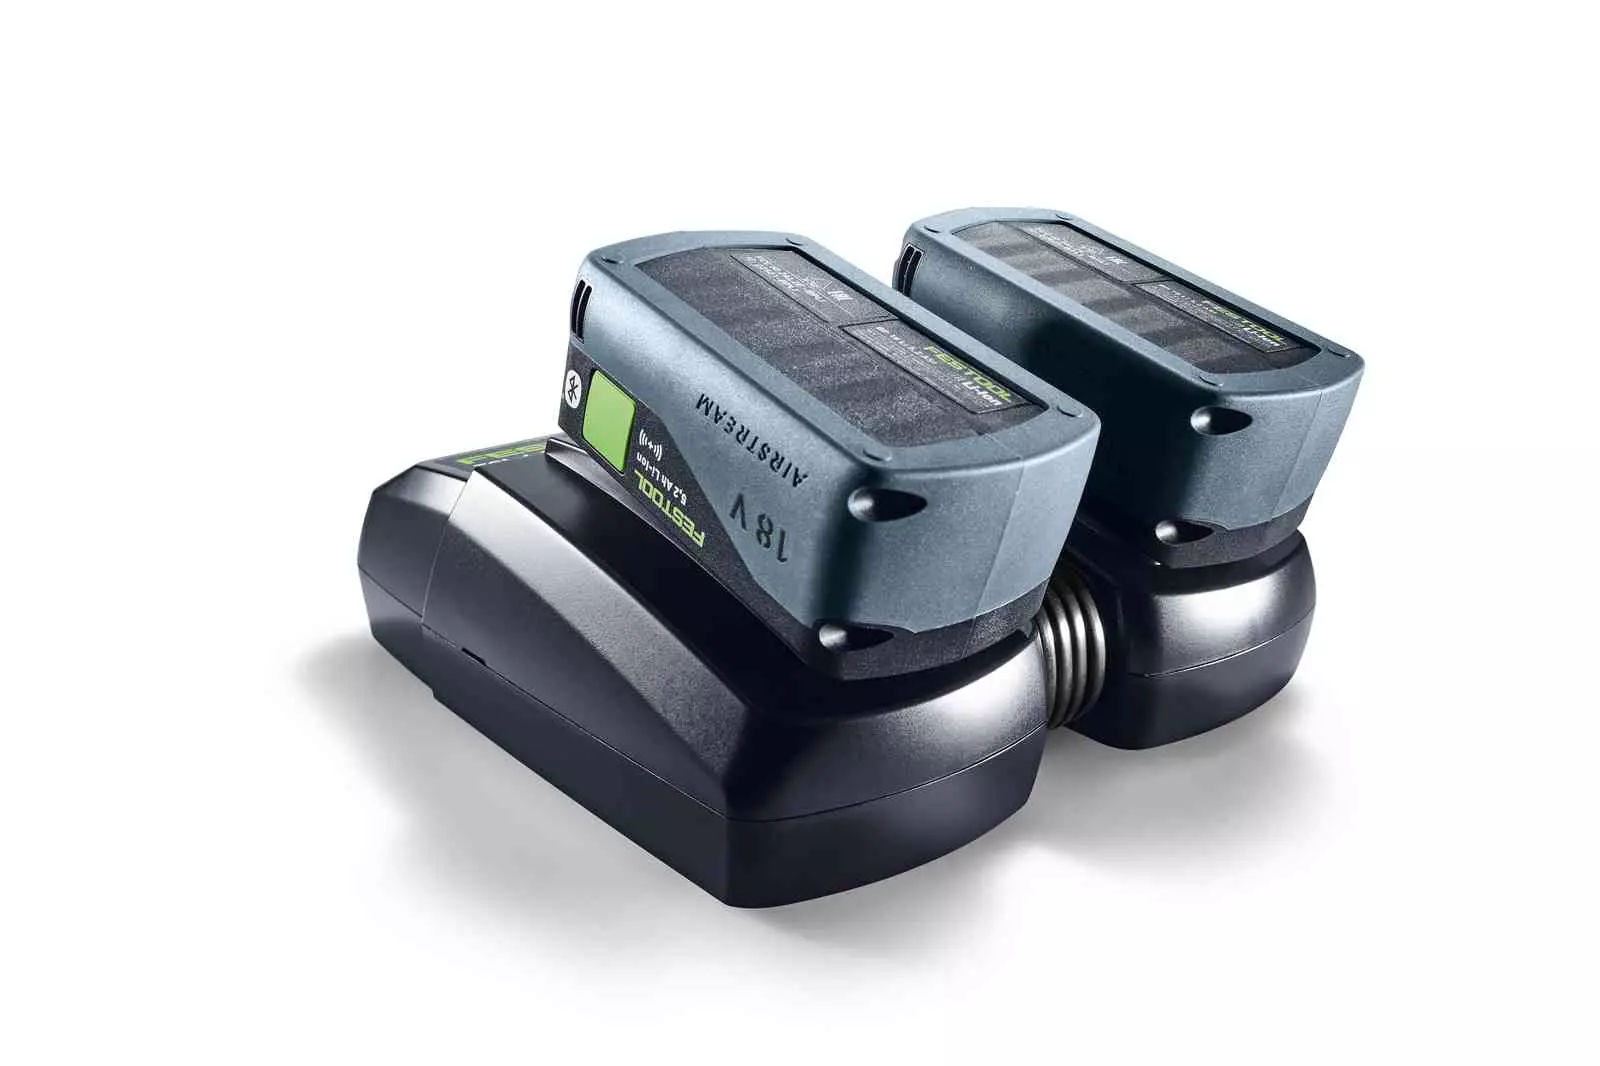 Charge two Festool batteries at once with the cordless kapex and cordless CT vacs